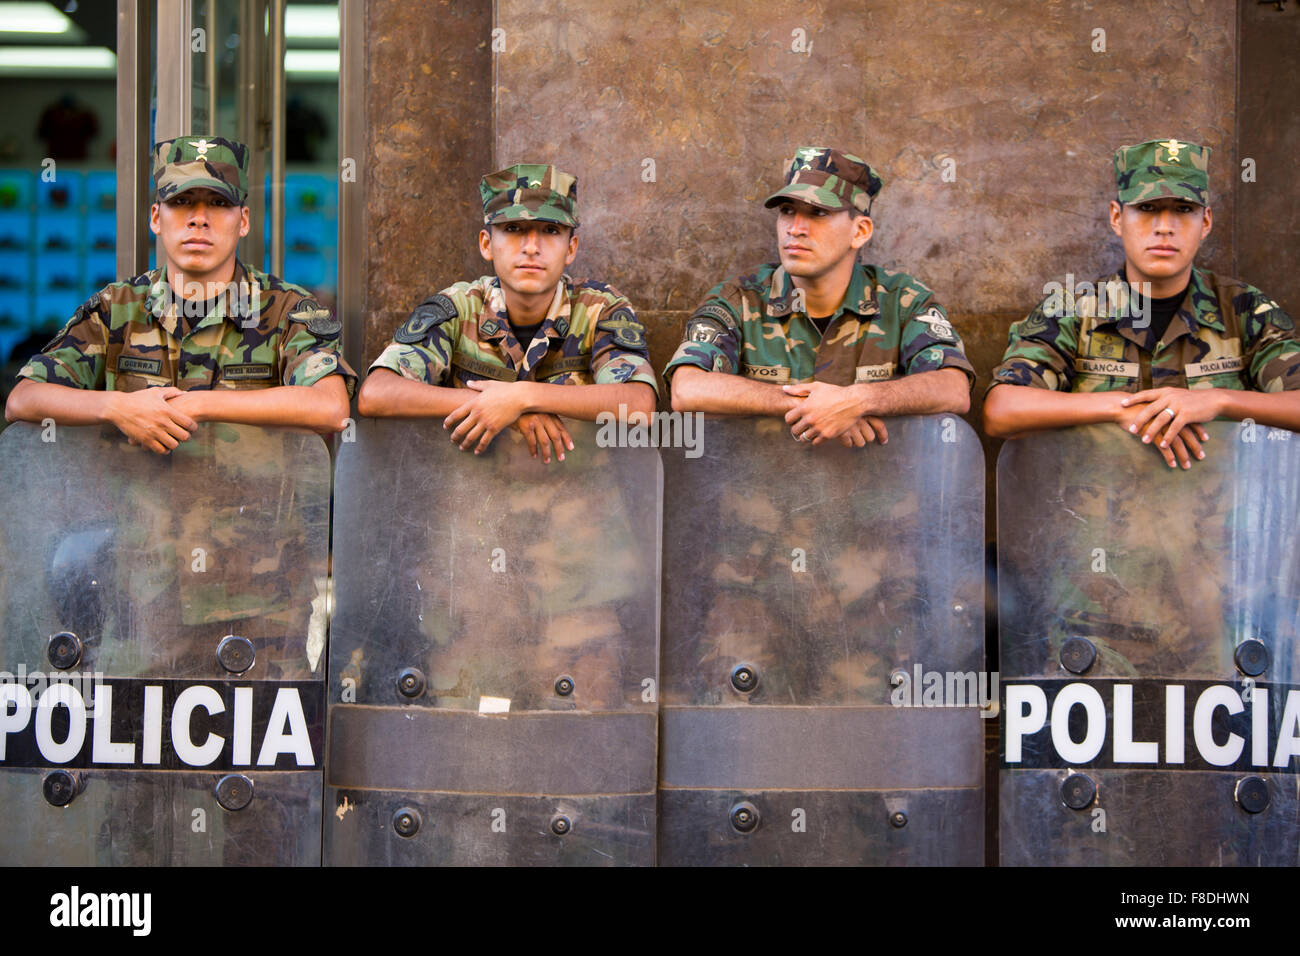 Police crew at work in Lima, Peru Stock Photo